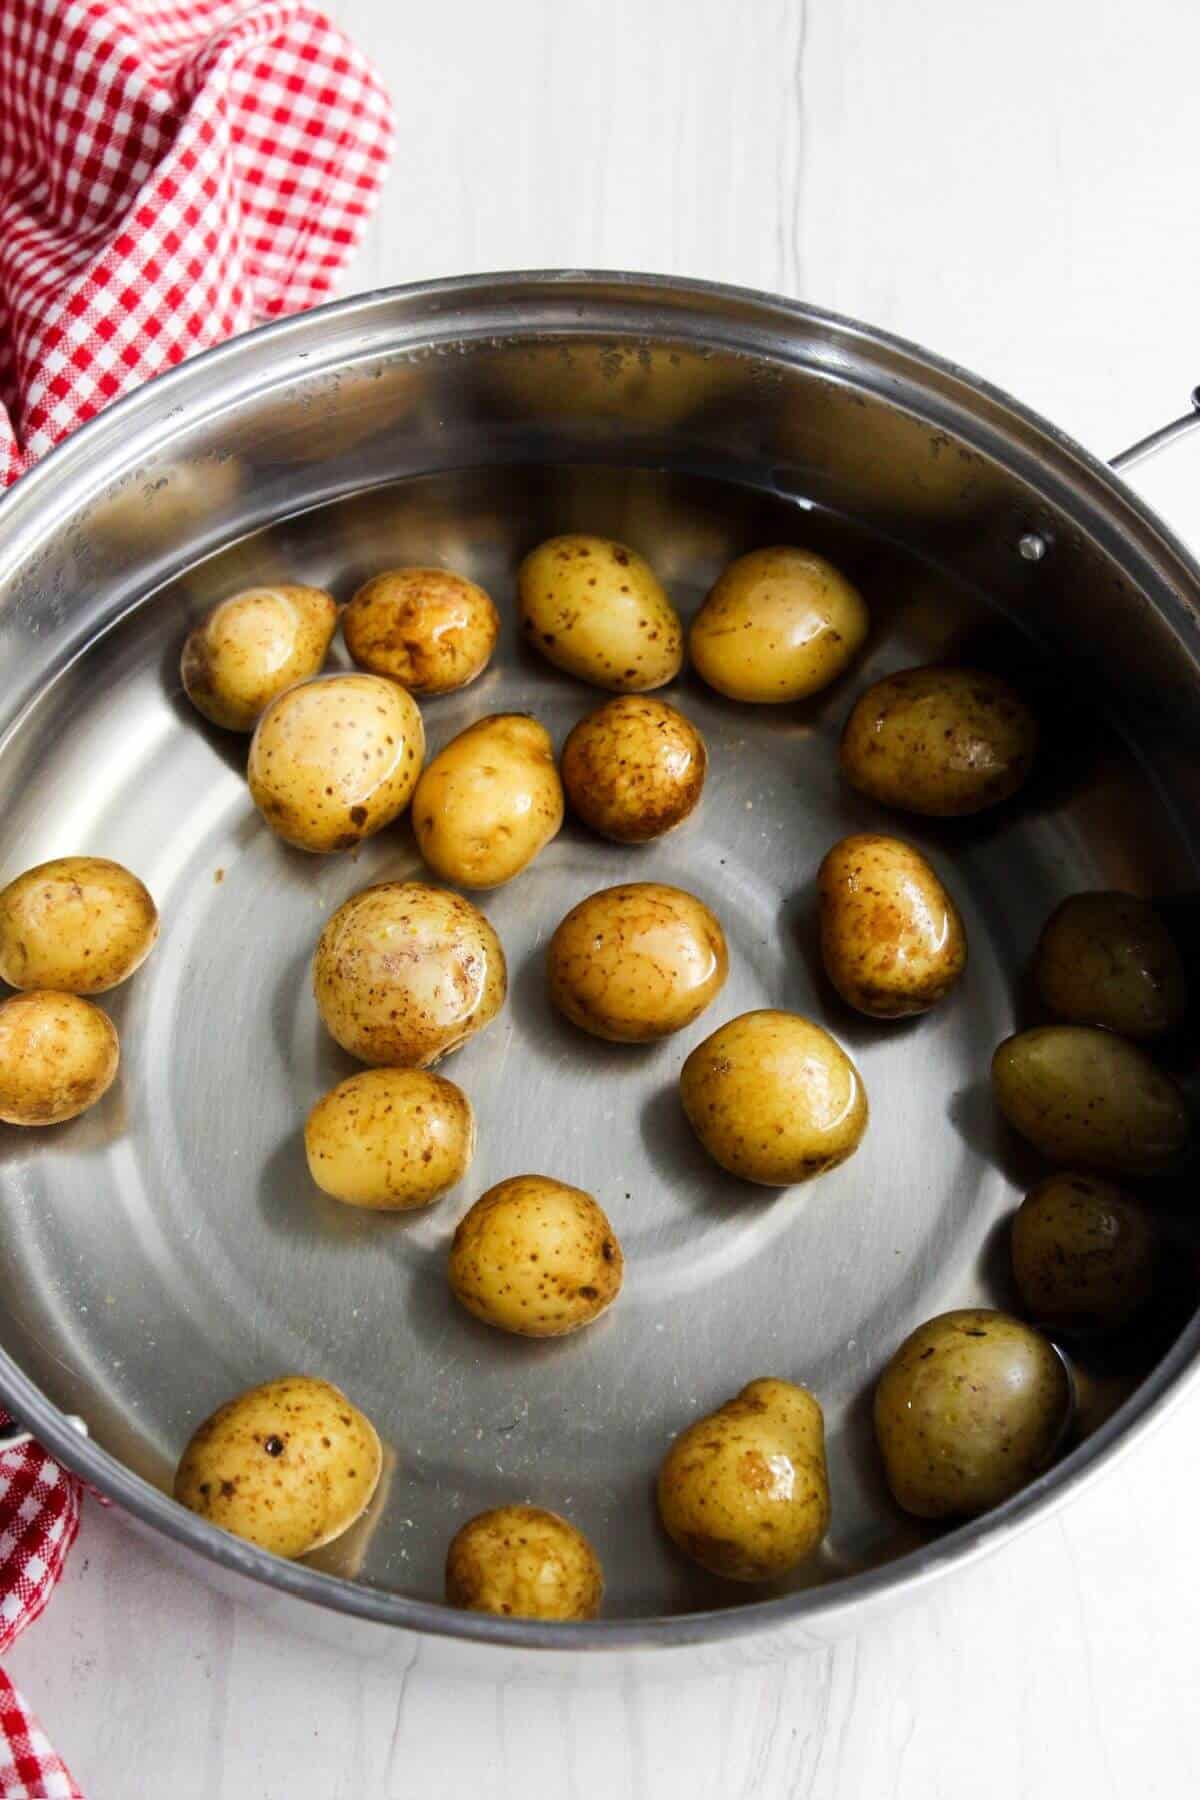 Potatoes in a pan with a red and white checkered cloth.